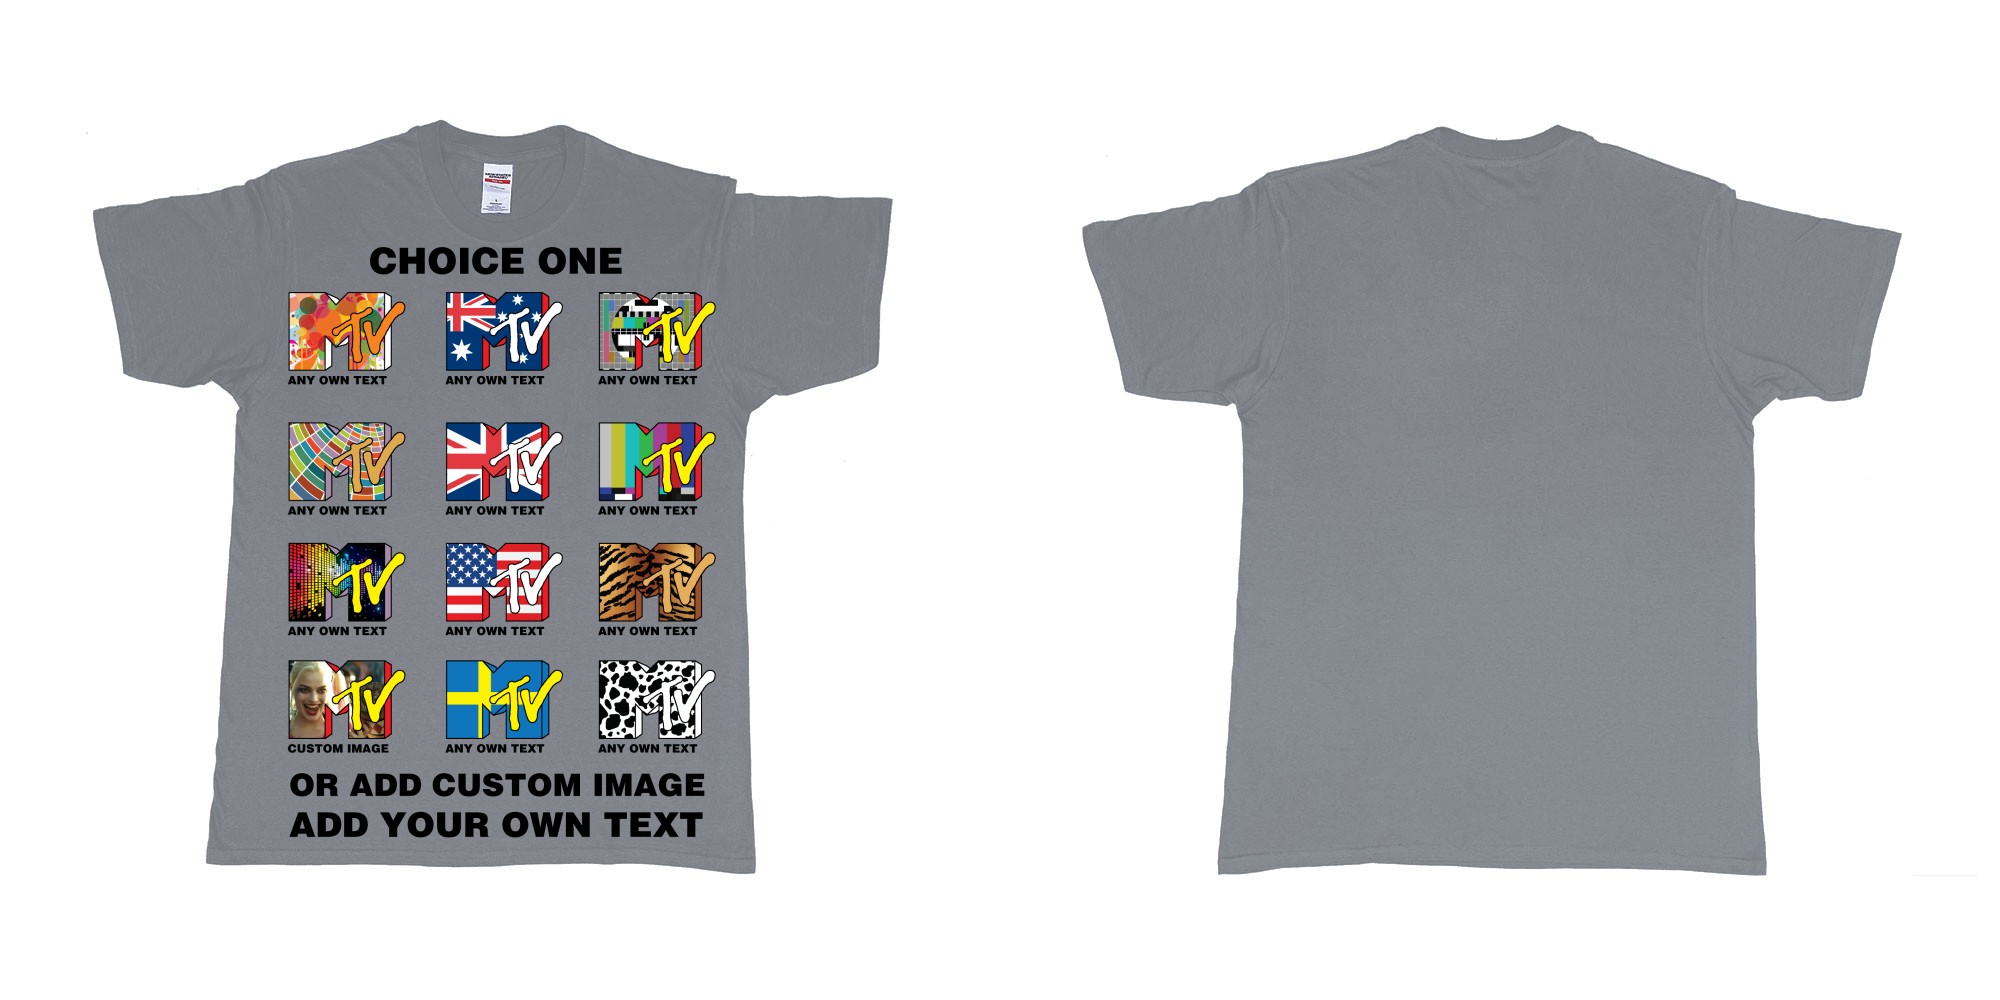 Custom tshirt design mtv logo choice any background text print in fabric color misty choice your own text made in Bali by The Pirate Way